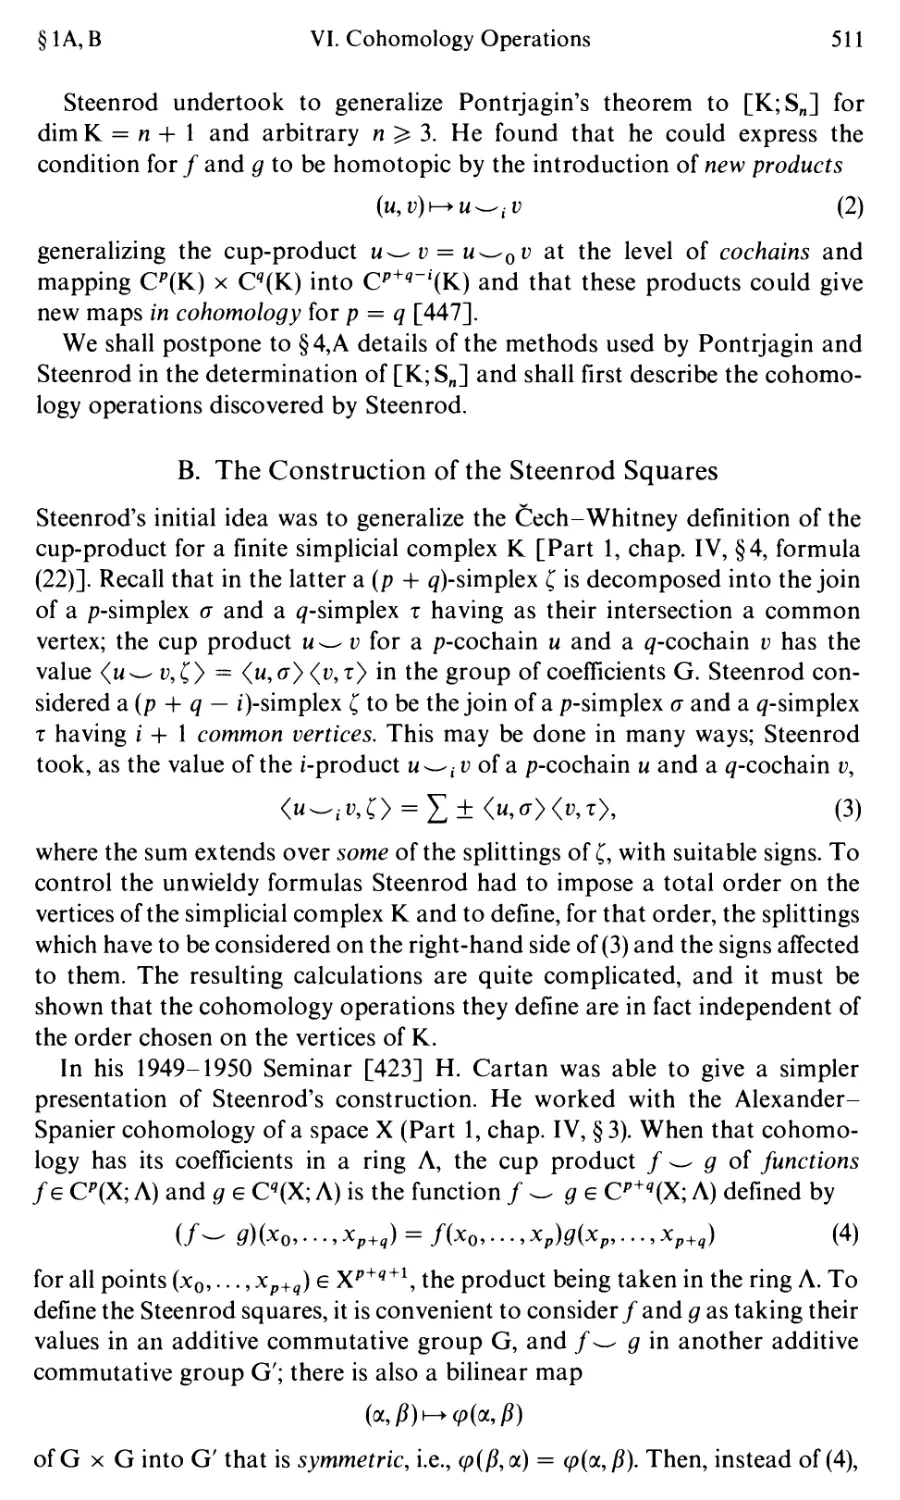 B. The Construction of the Steenrod Squares